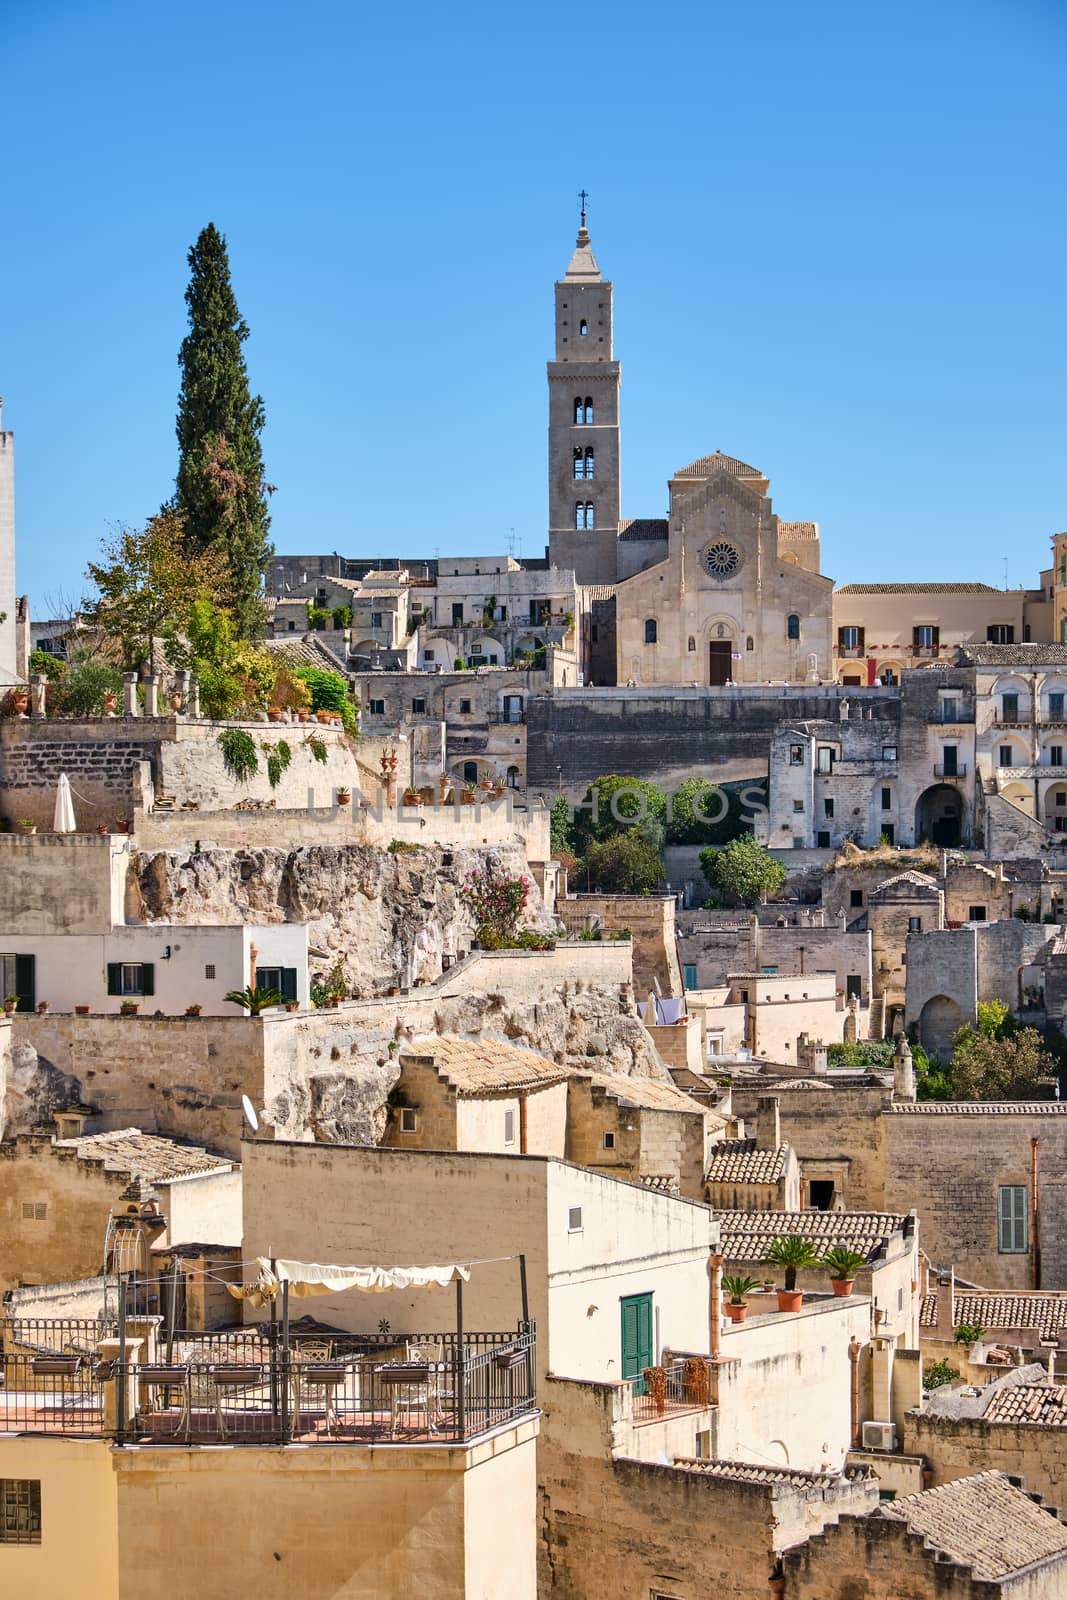 The old town of Matera in Italy with the cathedral in the back